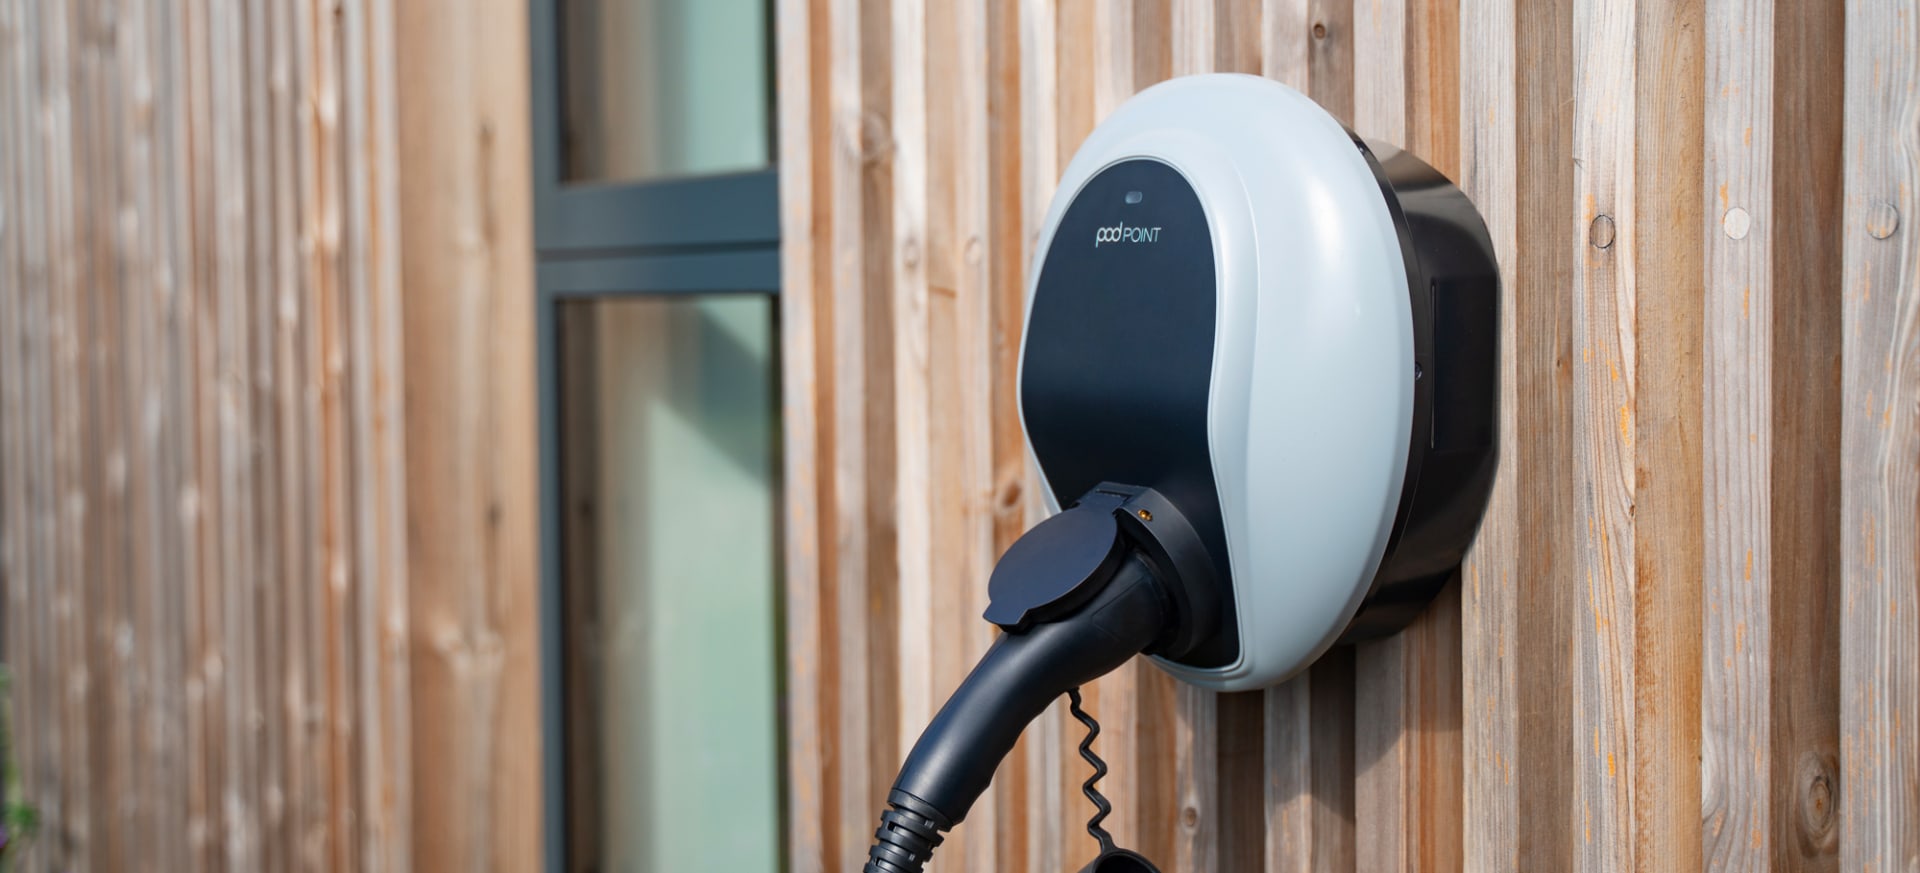 MINI Electric Complimentary Pod Point Charging Wall Box Offer